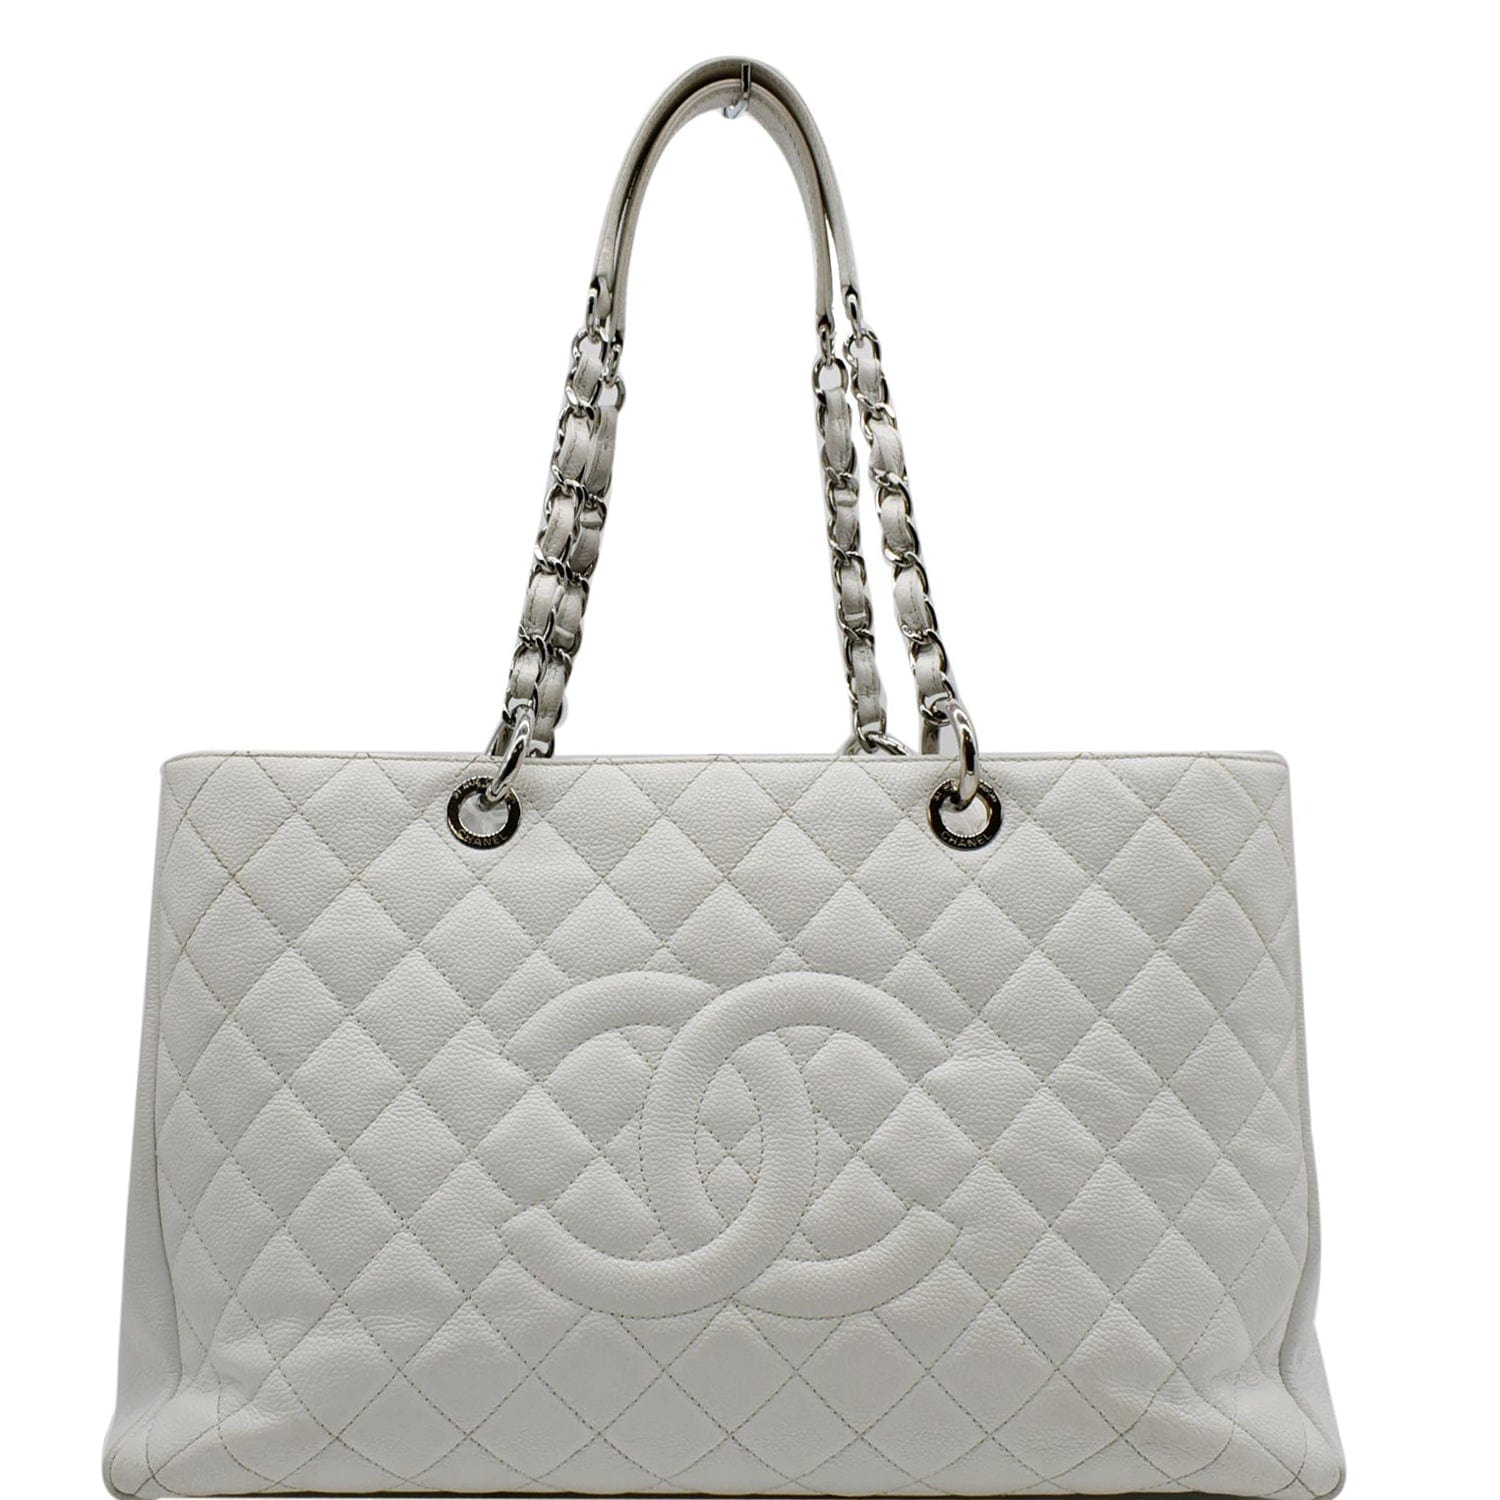 Chanel Chanel Marshmallow Black  White Tote Bag Limited Edition